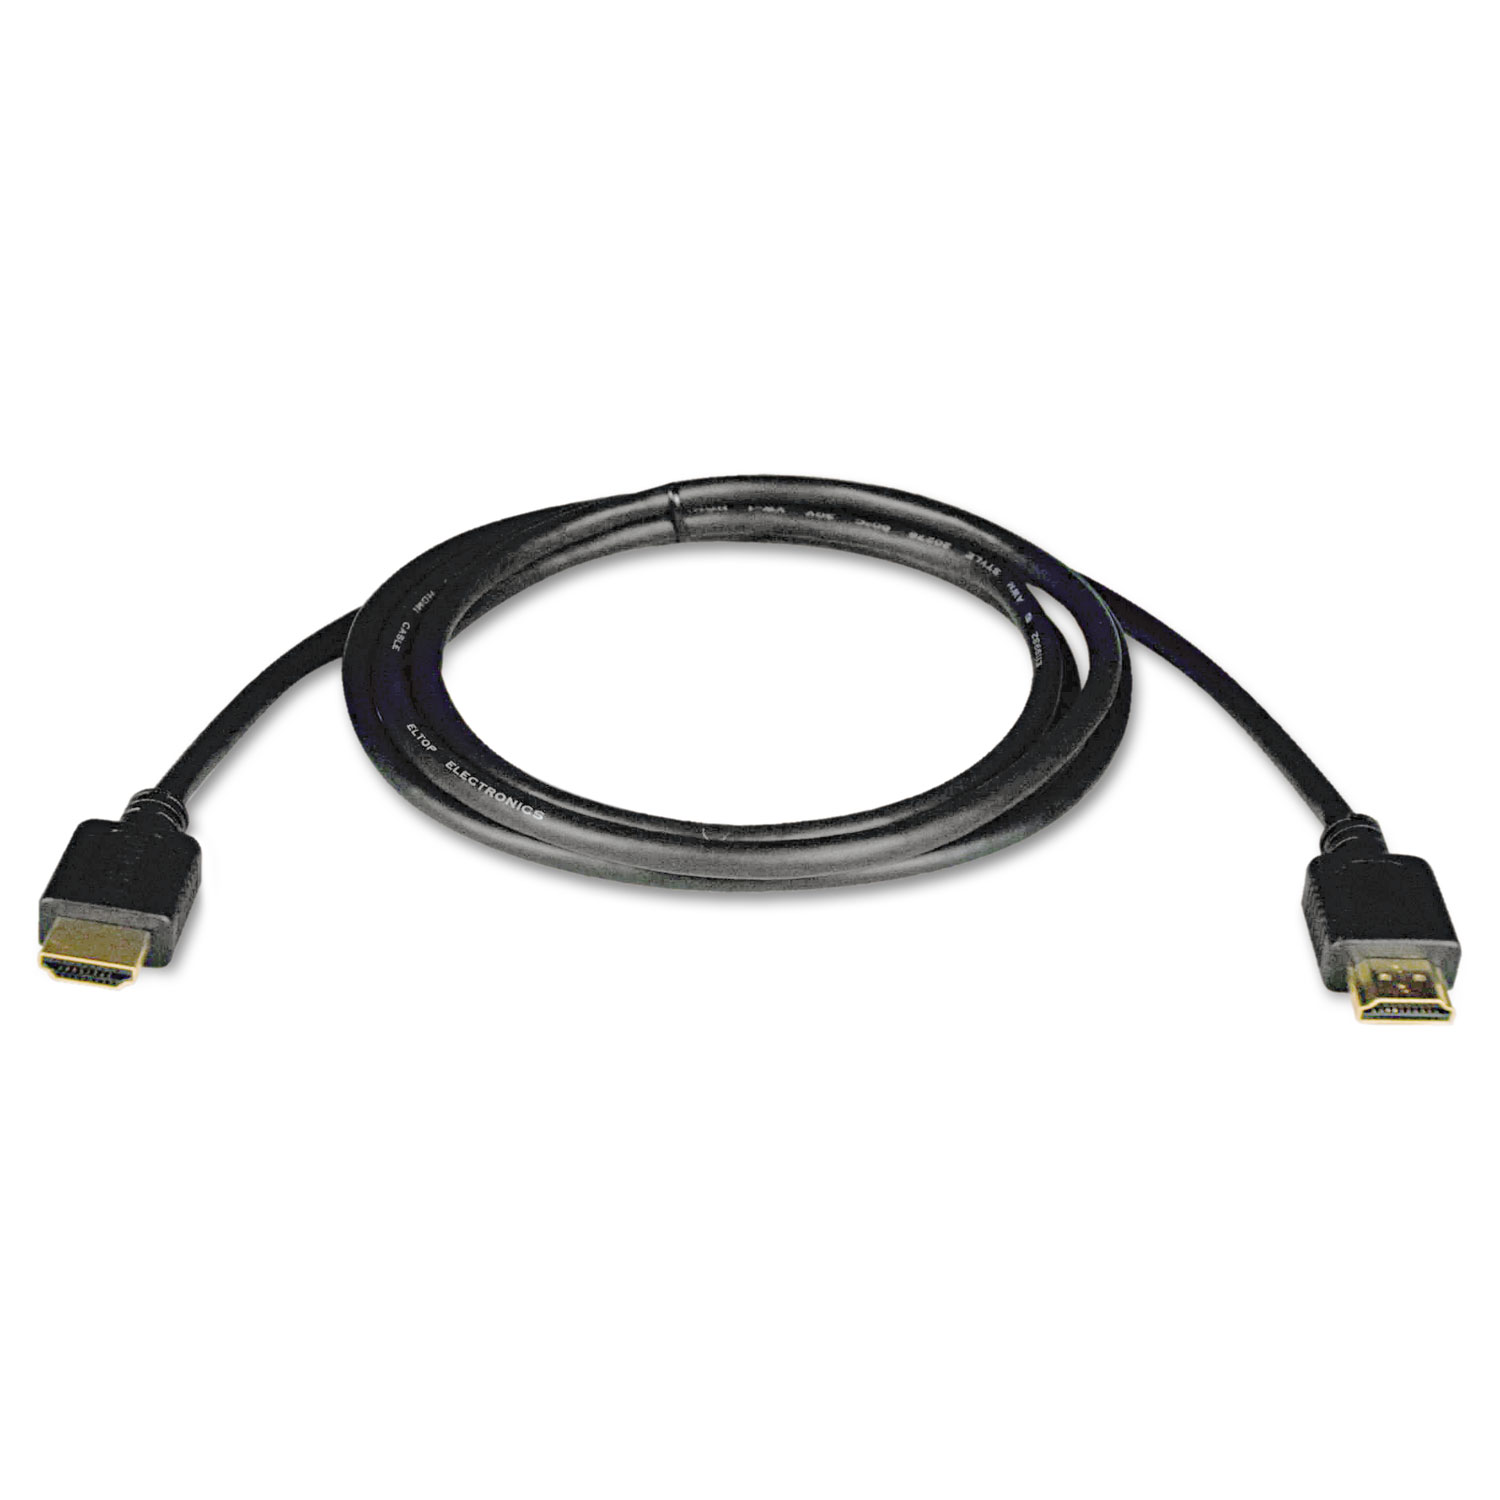  Tripp Lite P568-025 High Speed HDMI Cable, HD 1080p, Digital Video with Audio (M/M), 25 ft. (TRPP568025) 